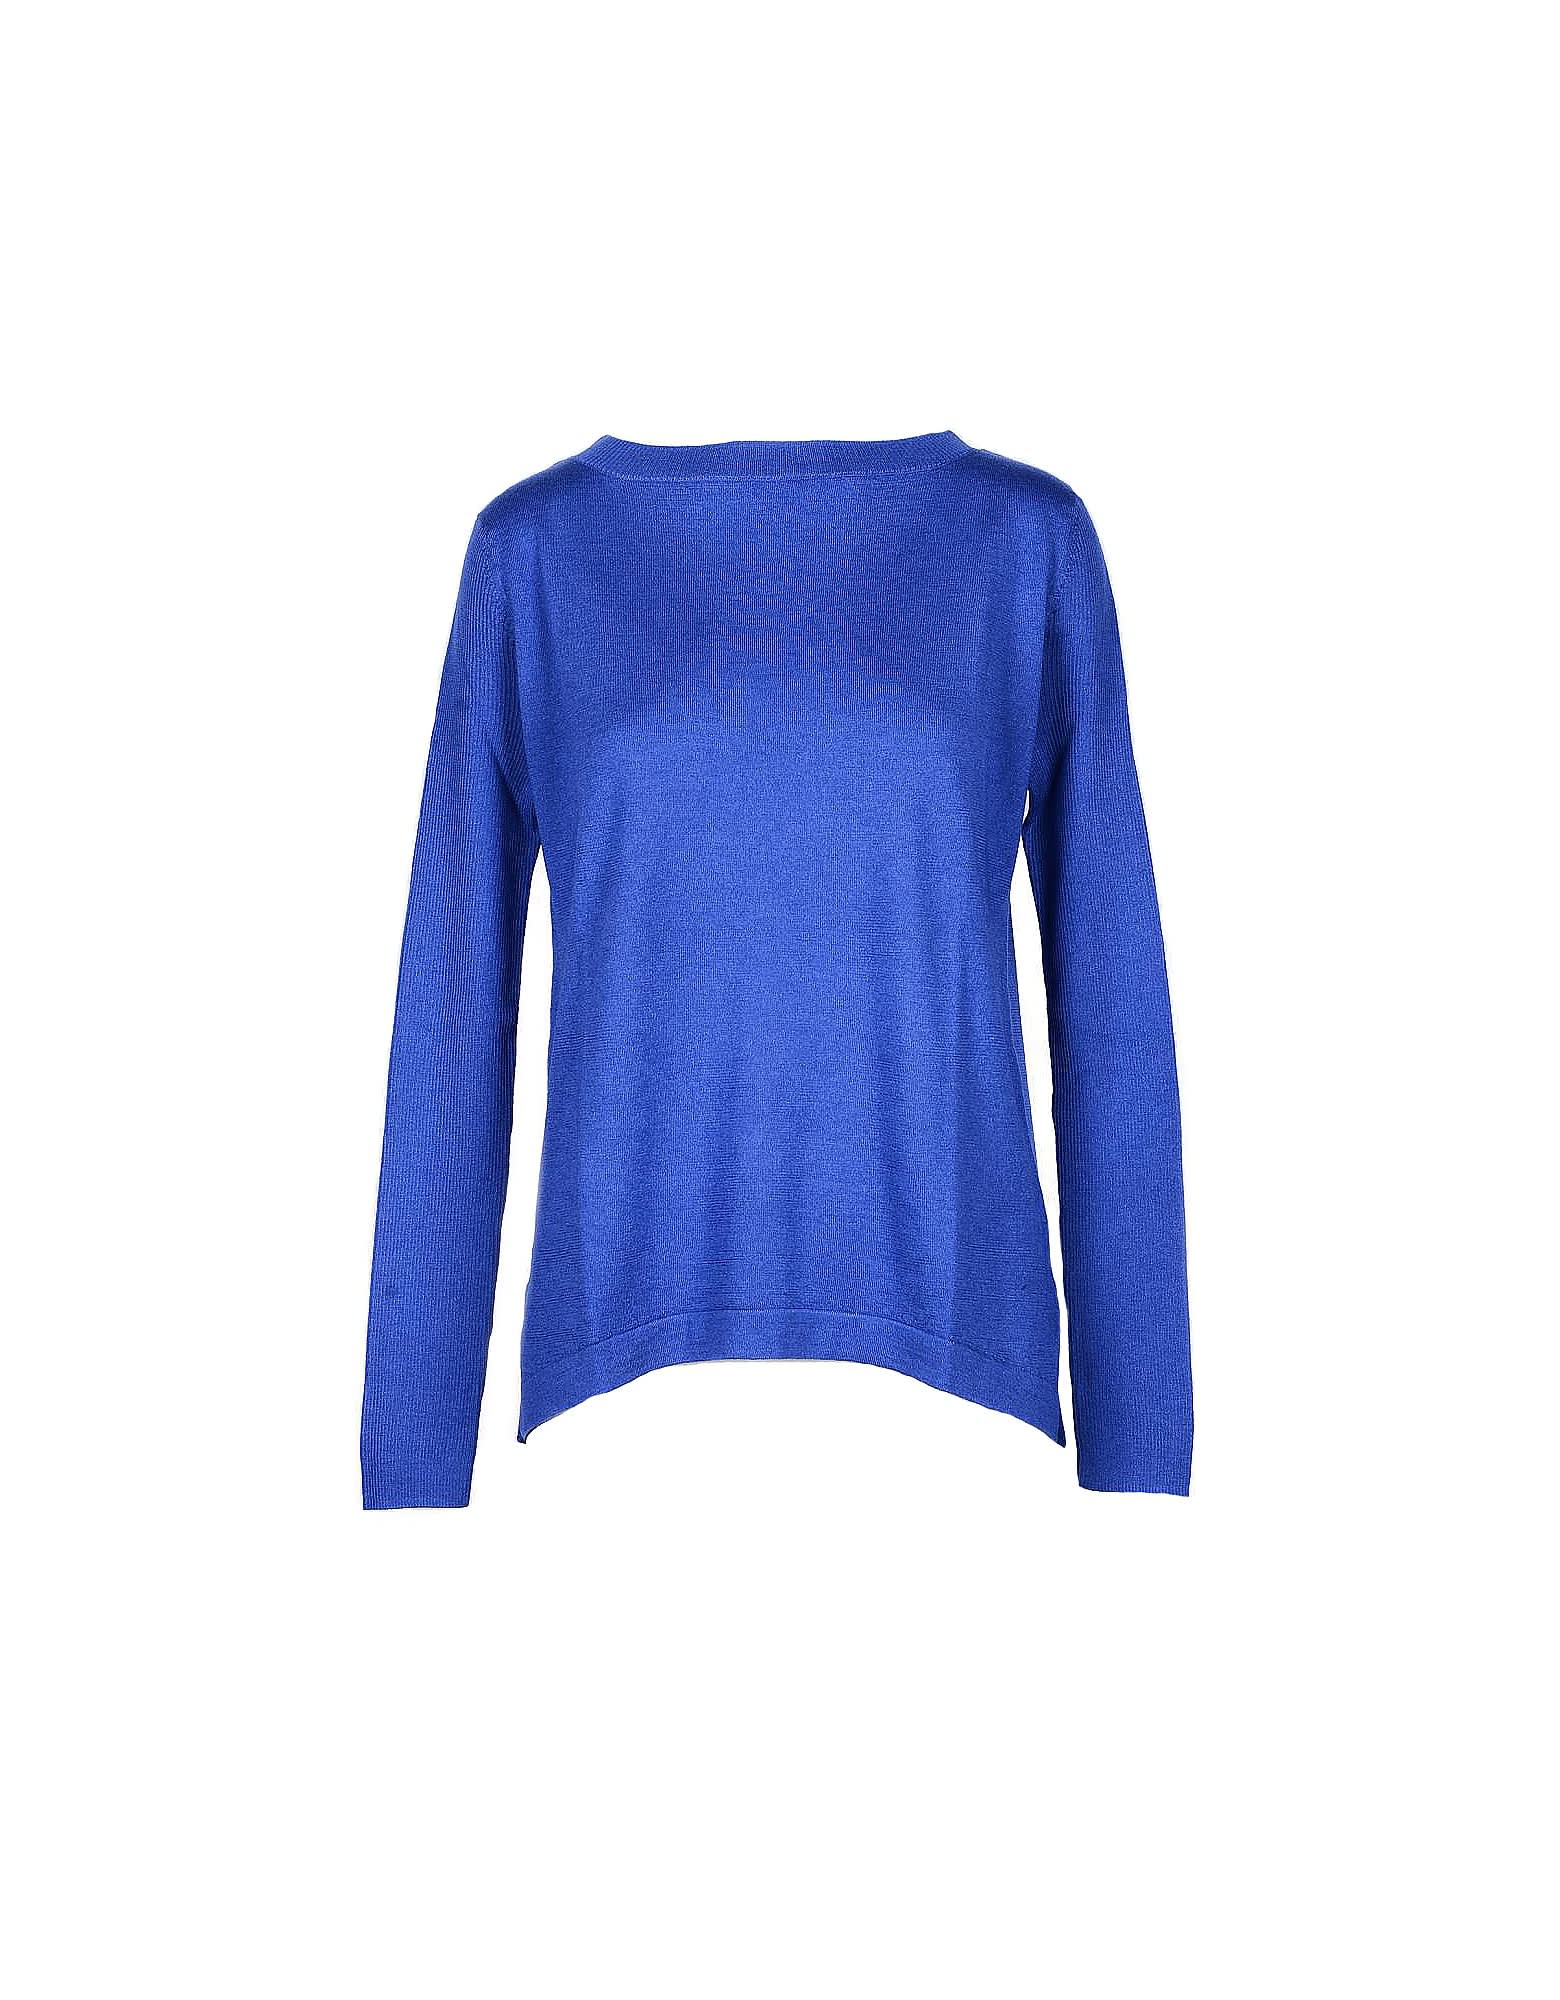 Snobby Sheep Bluette Silk And Cashmere Blend Womens Sweater